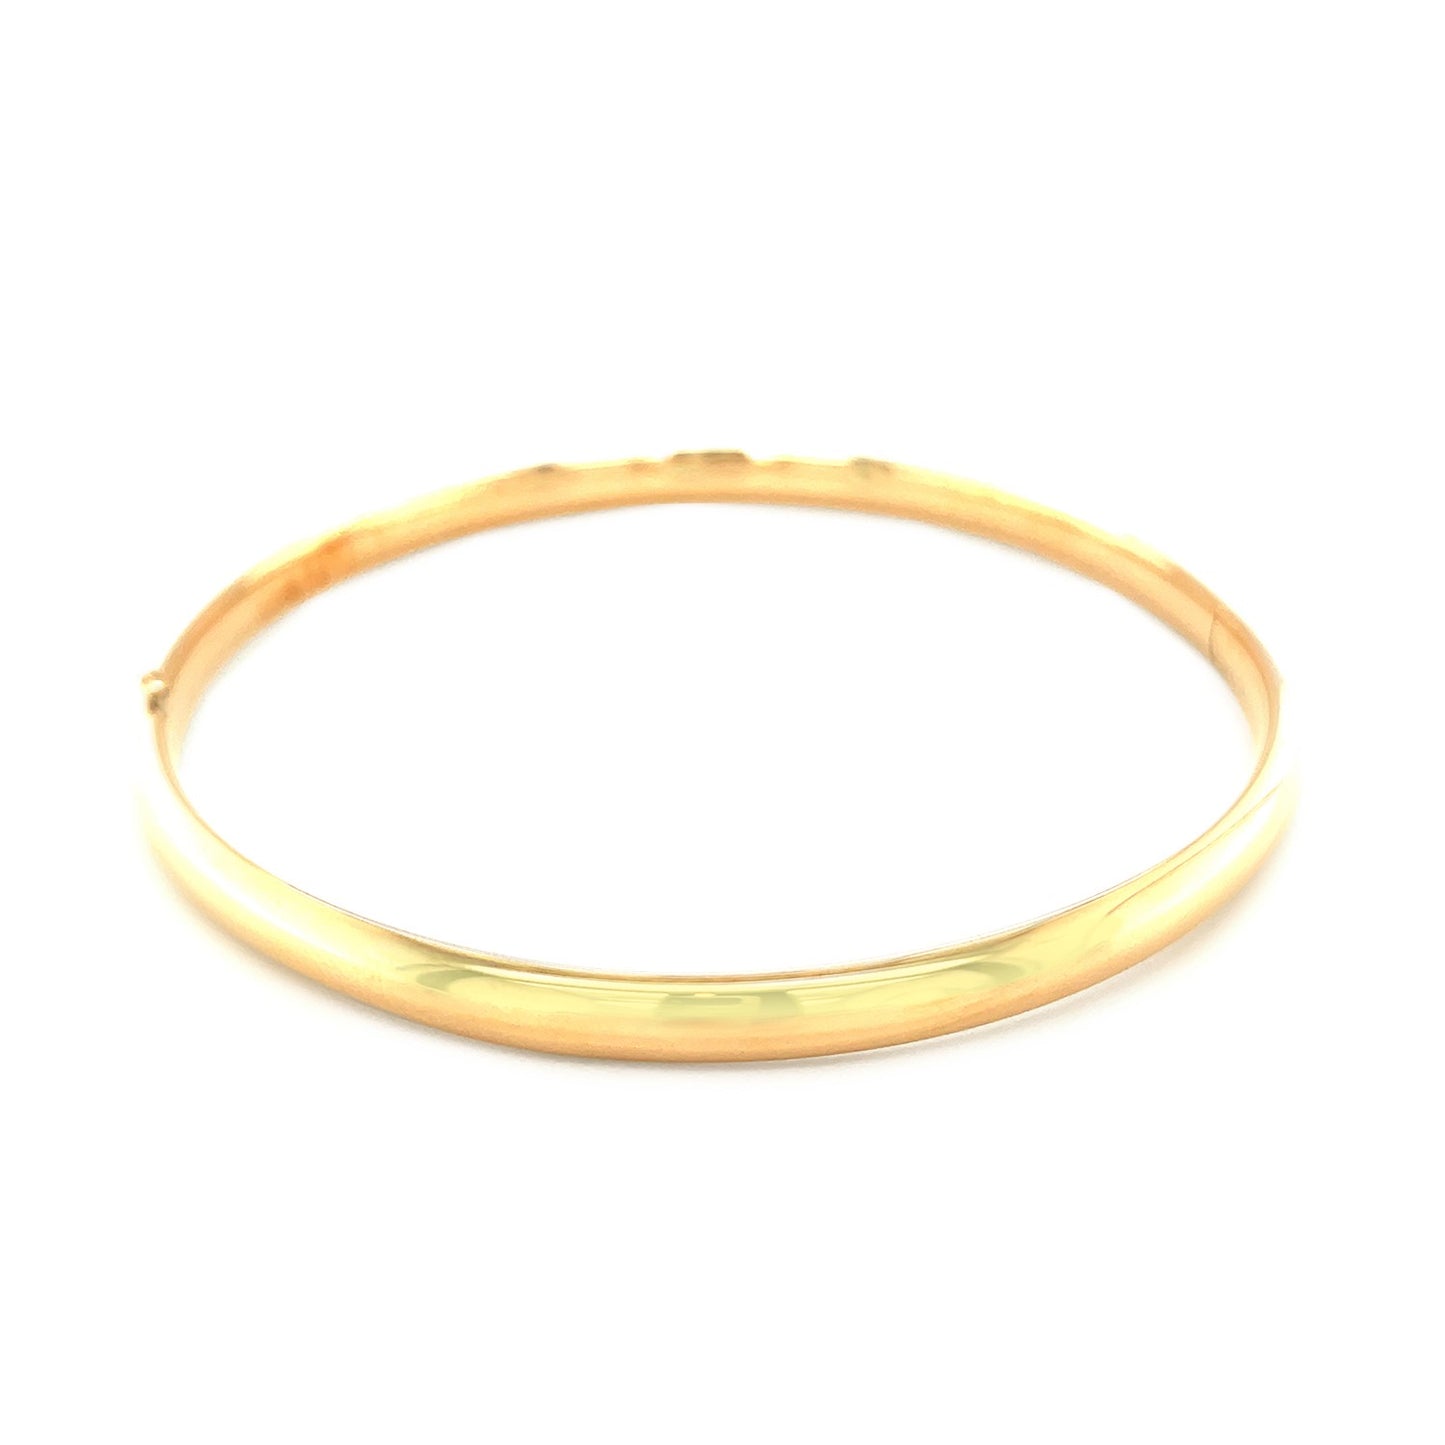 Classic Bangle in 14k Yellow Gold (5.0mm)